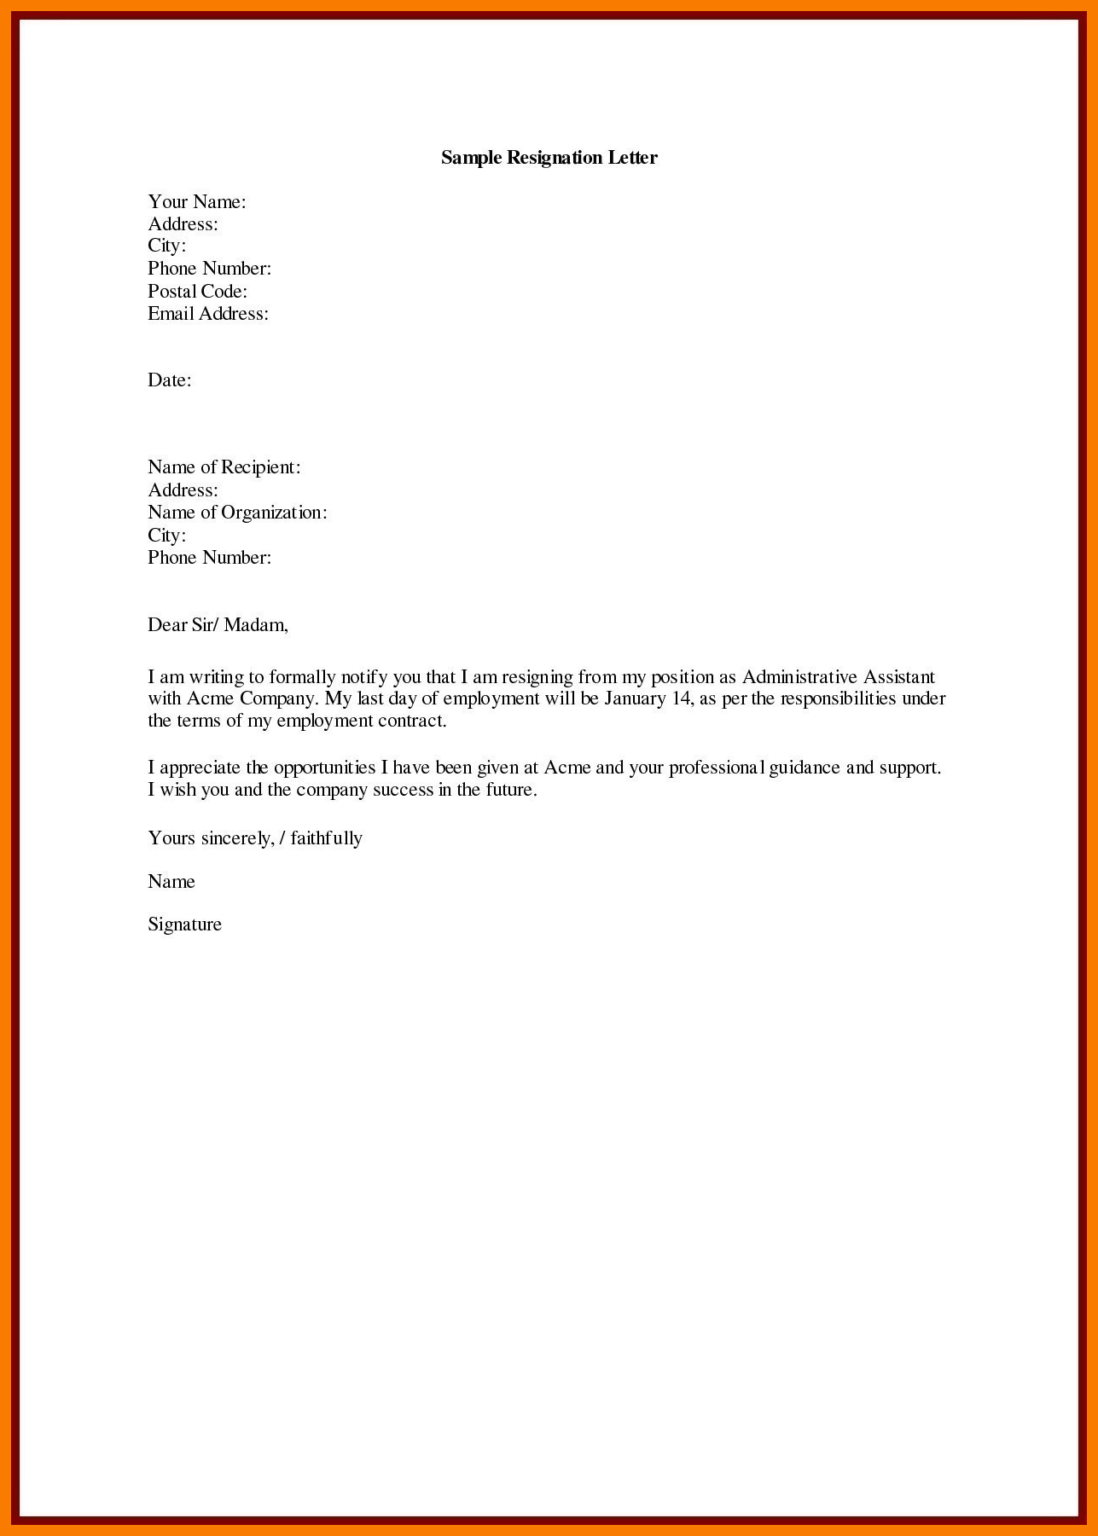 Noc Letter Format From Employer Throughout Noc Report Template Creative 0266